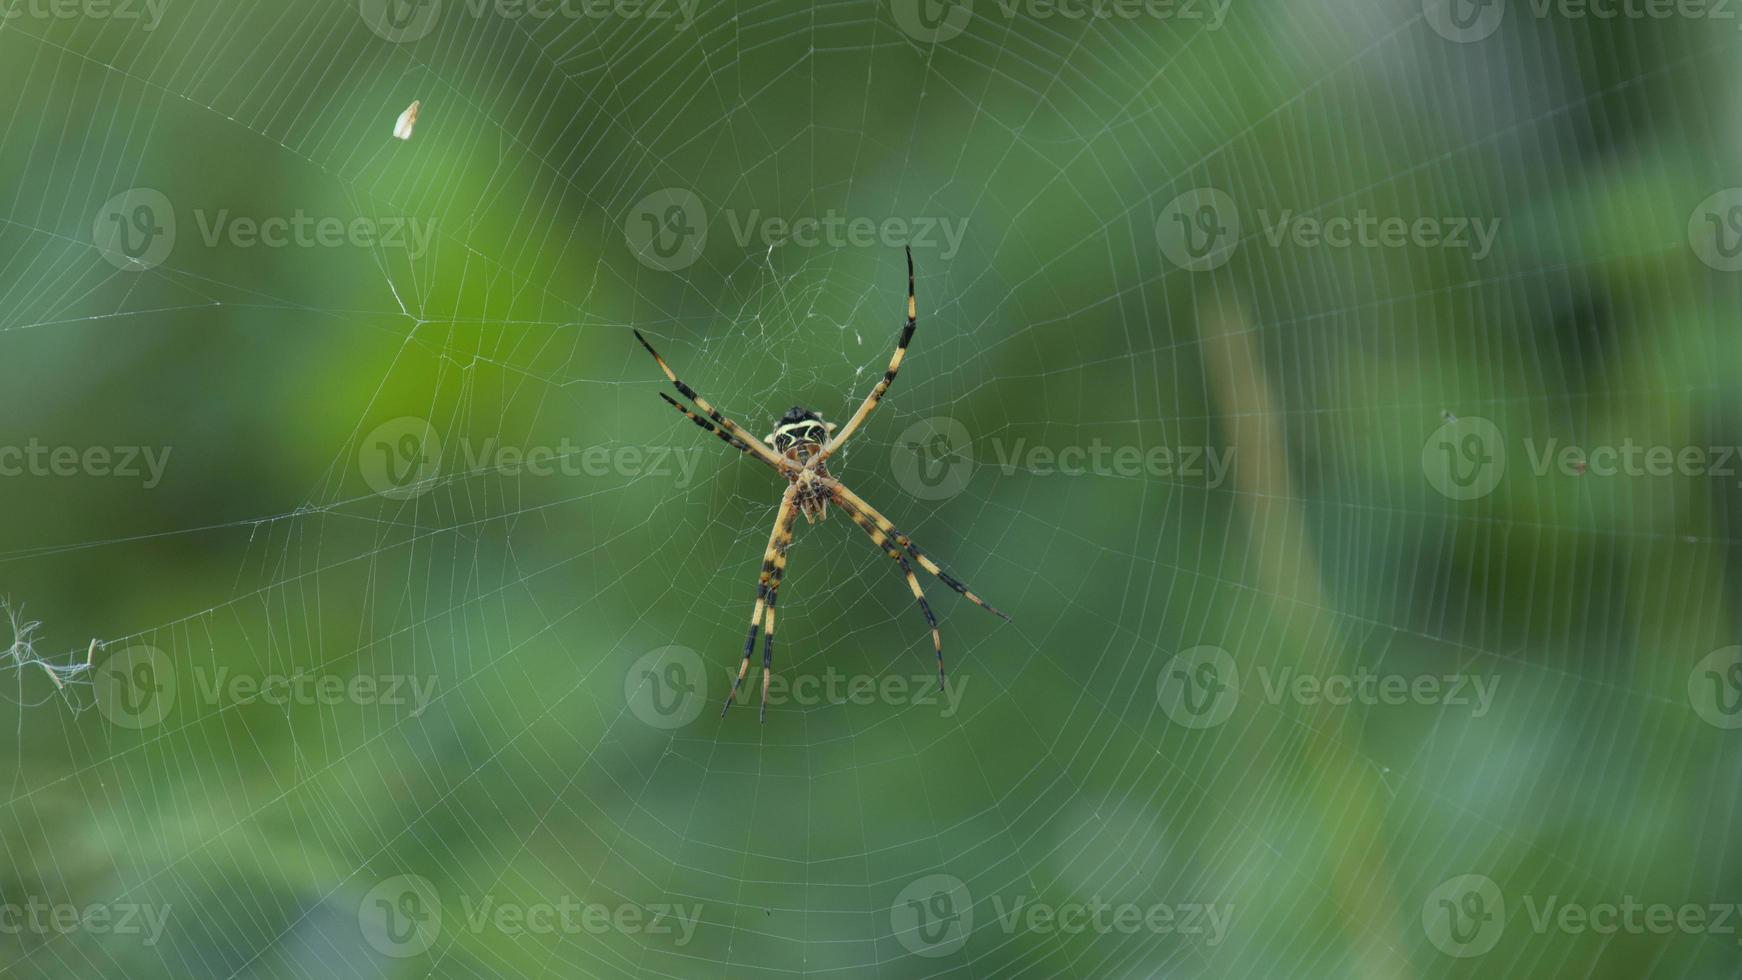 Spider with black and yellow body and legs in the center of its spider web on green background photo